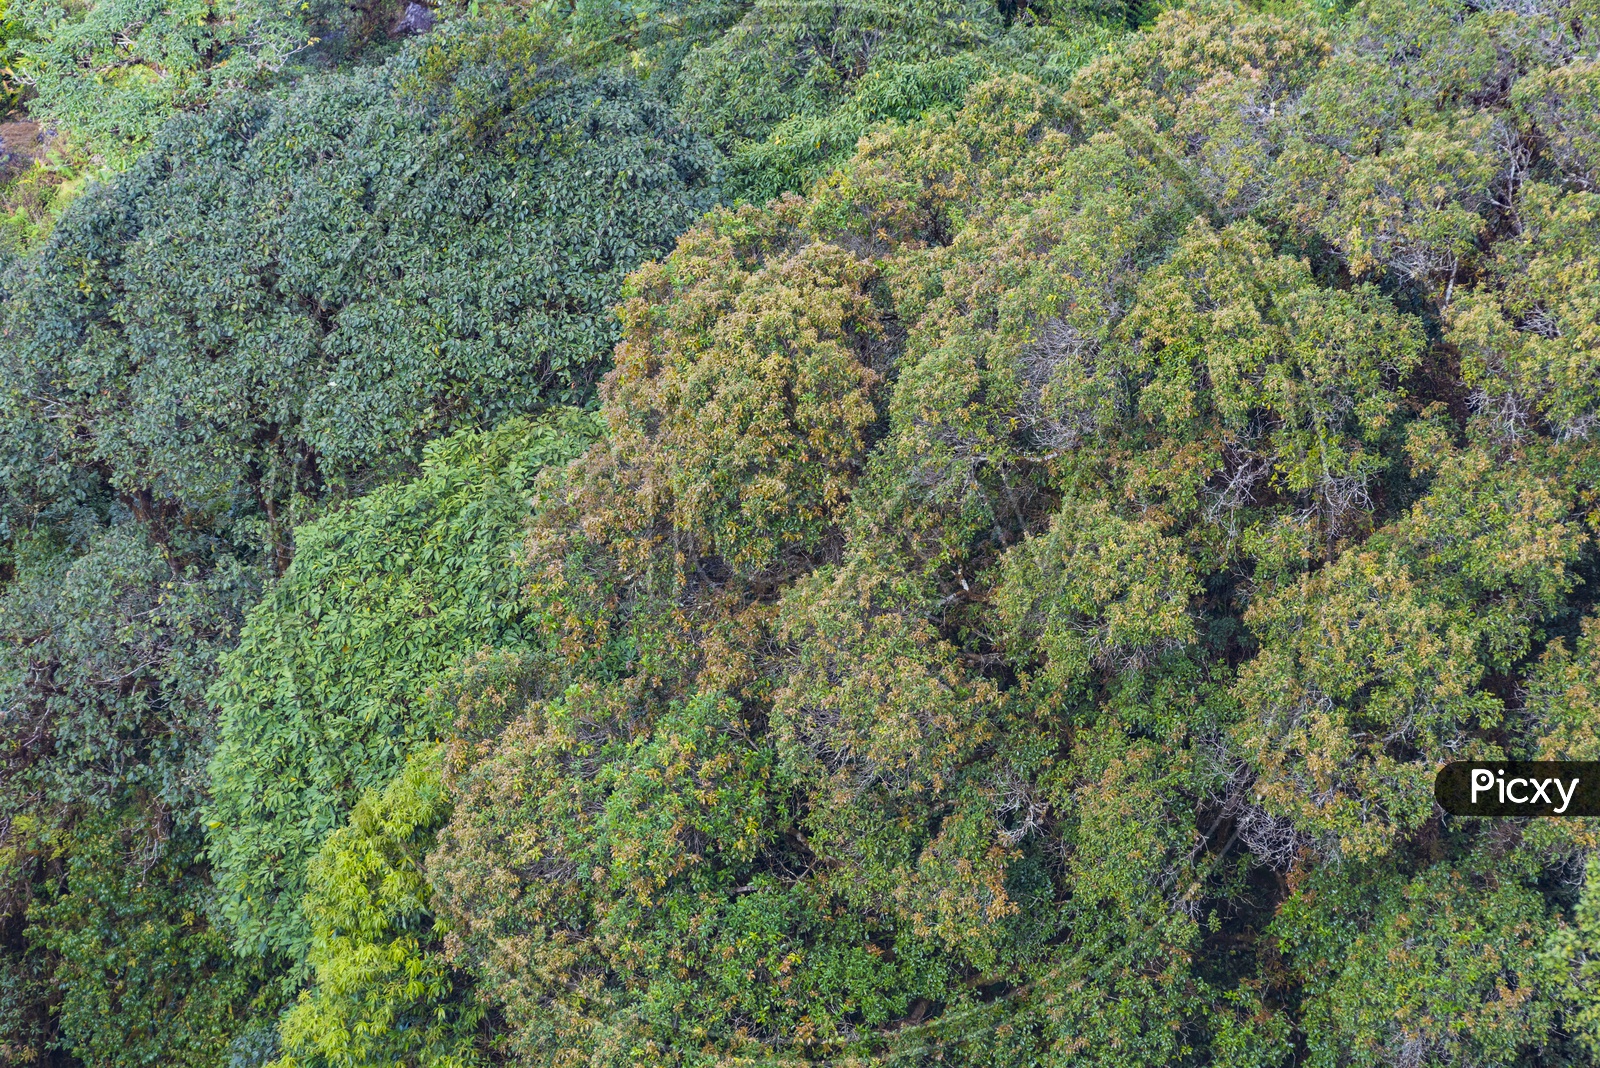 Mountains, Trees, and greenery in a deep forest Ariel view